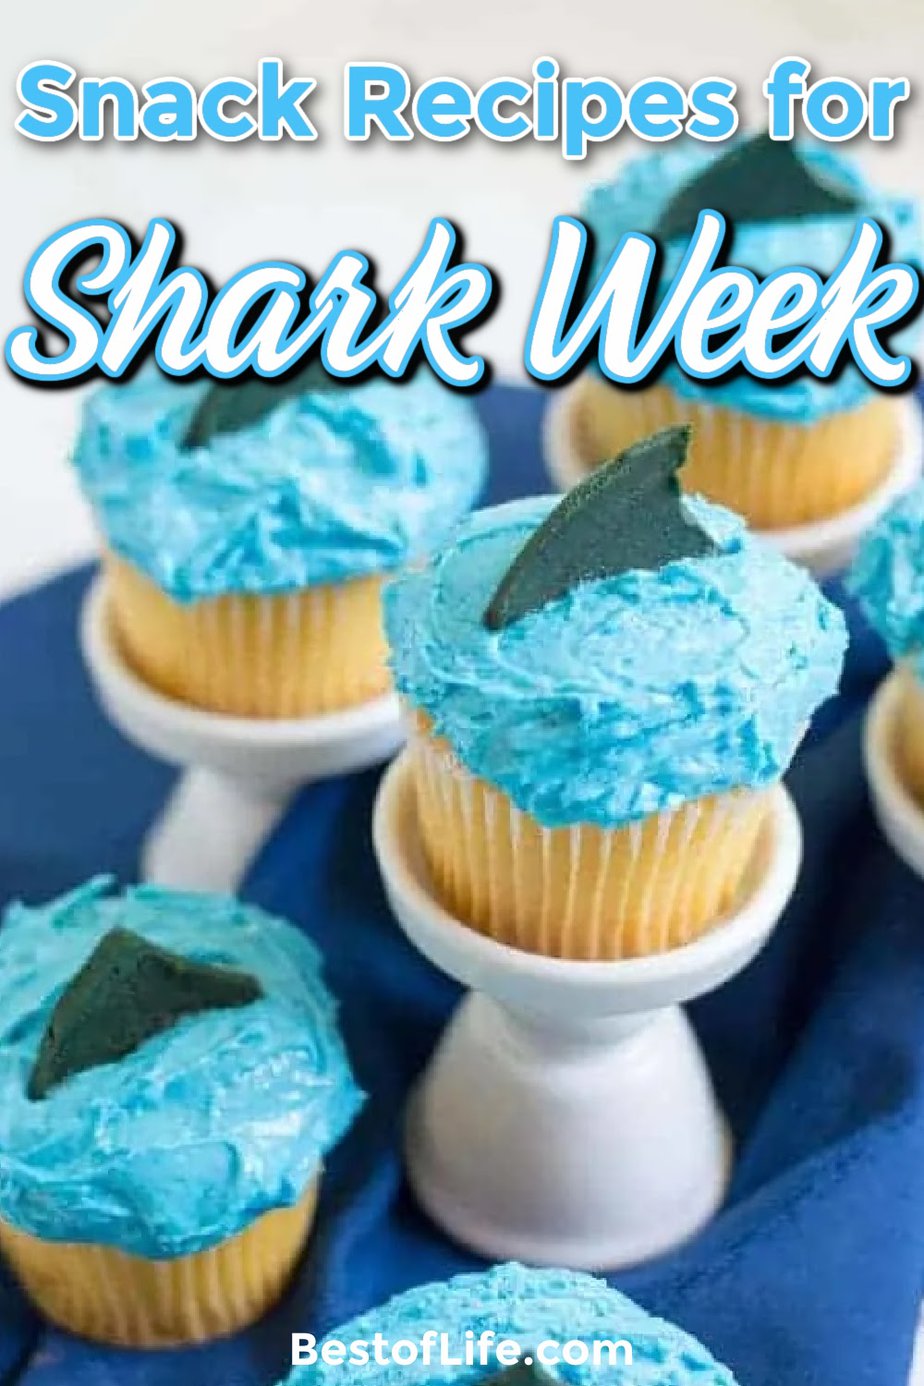 Shark Week Desserts are perfect for every night of Shark Week and will help you host a killer Shark Week party! Best Shark Week Recipes | Desserts for Shark Week | Shark Week Desserts | Shark Themed Desserts #sharkweek #desserts #recipes